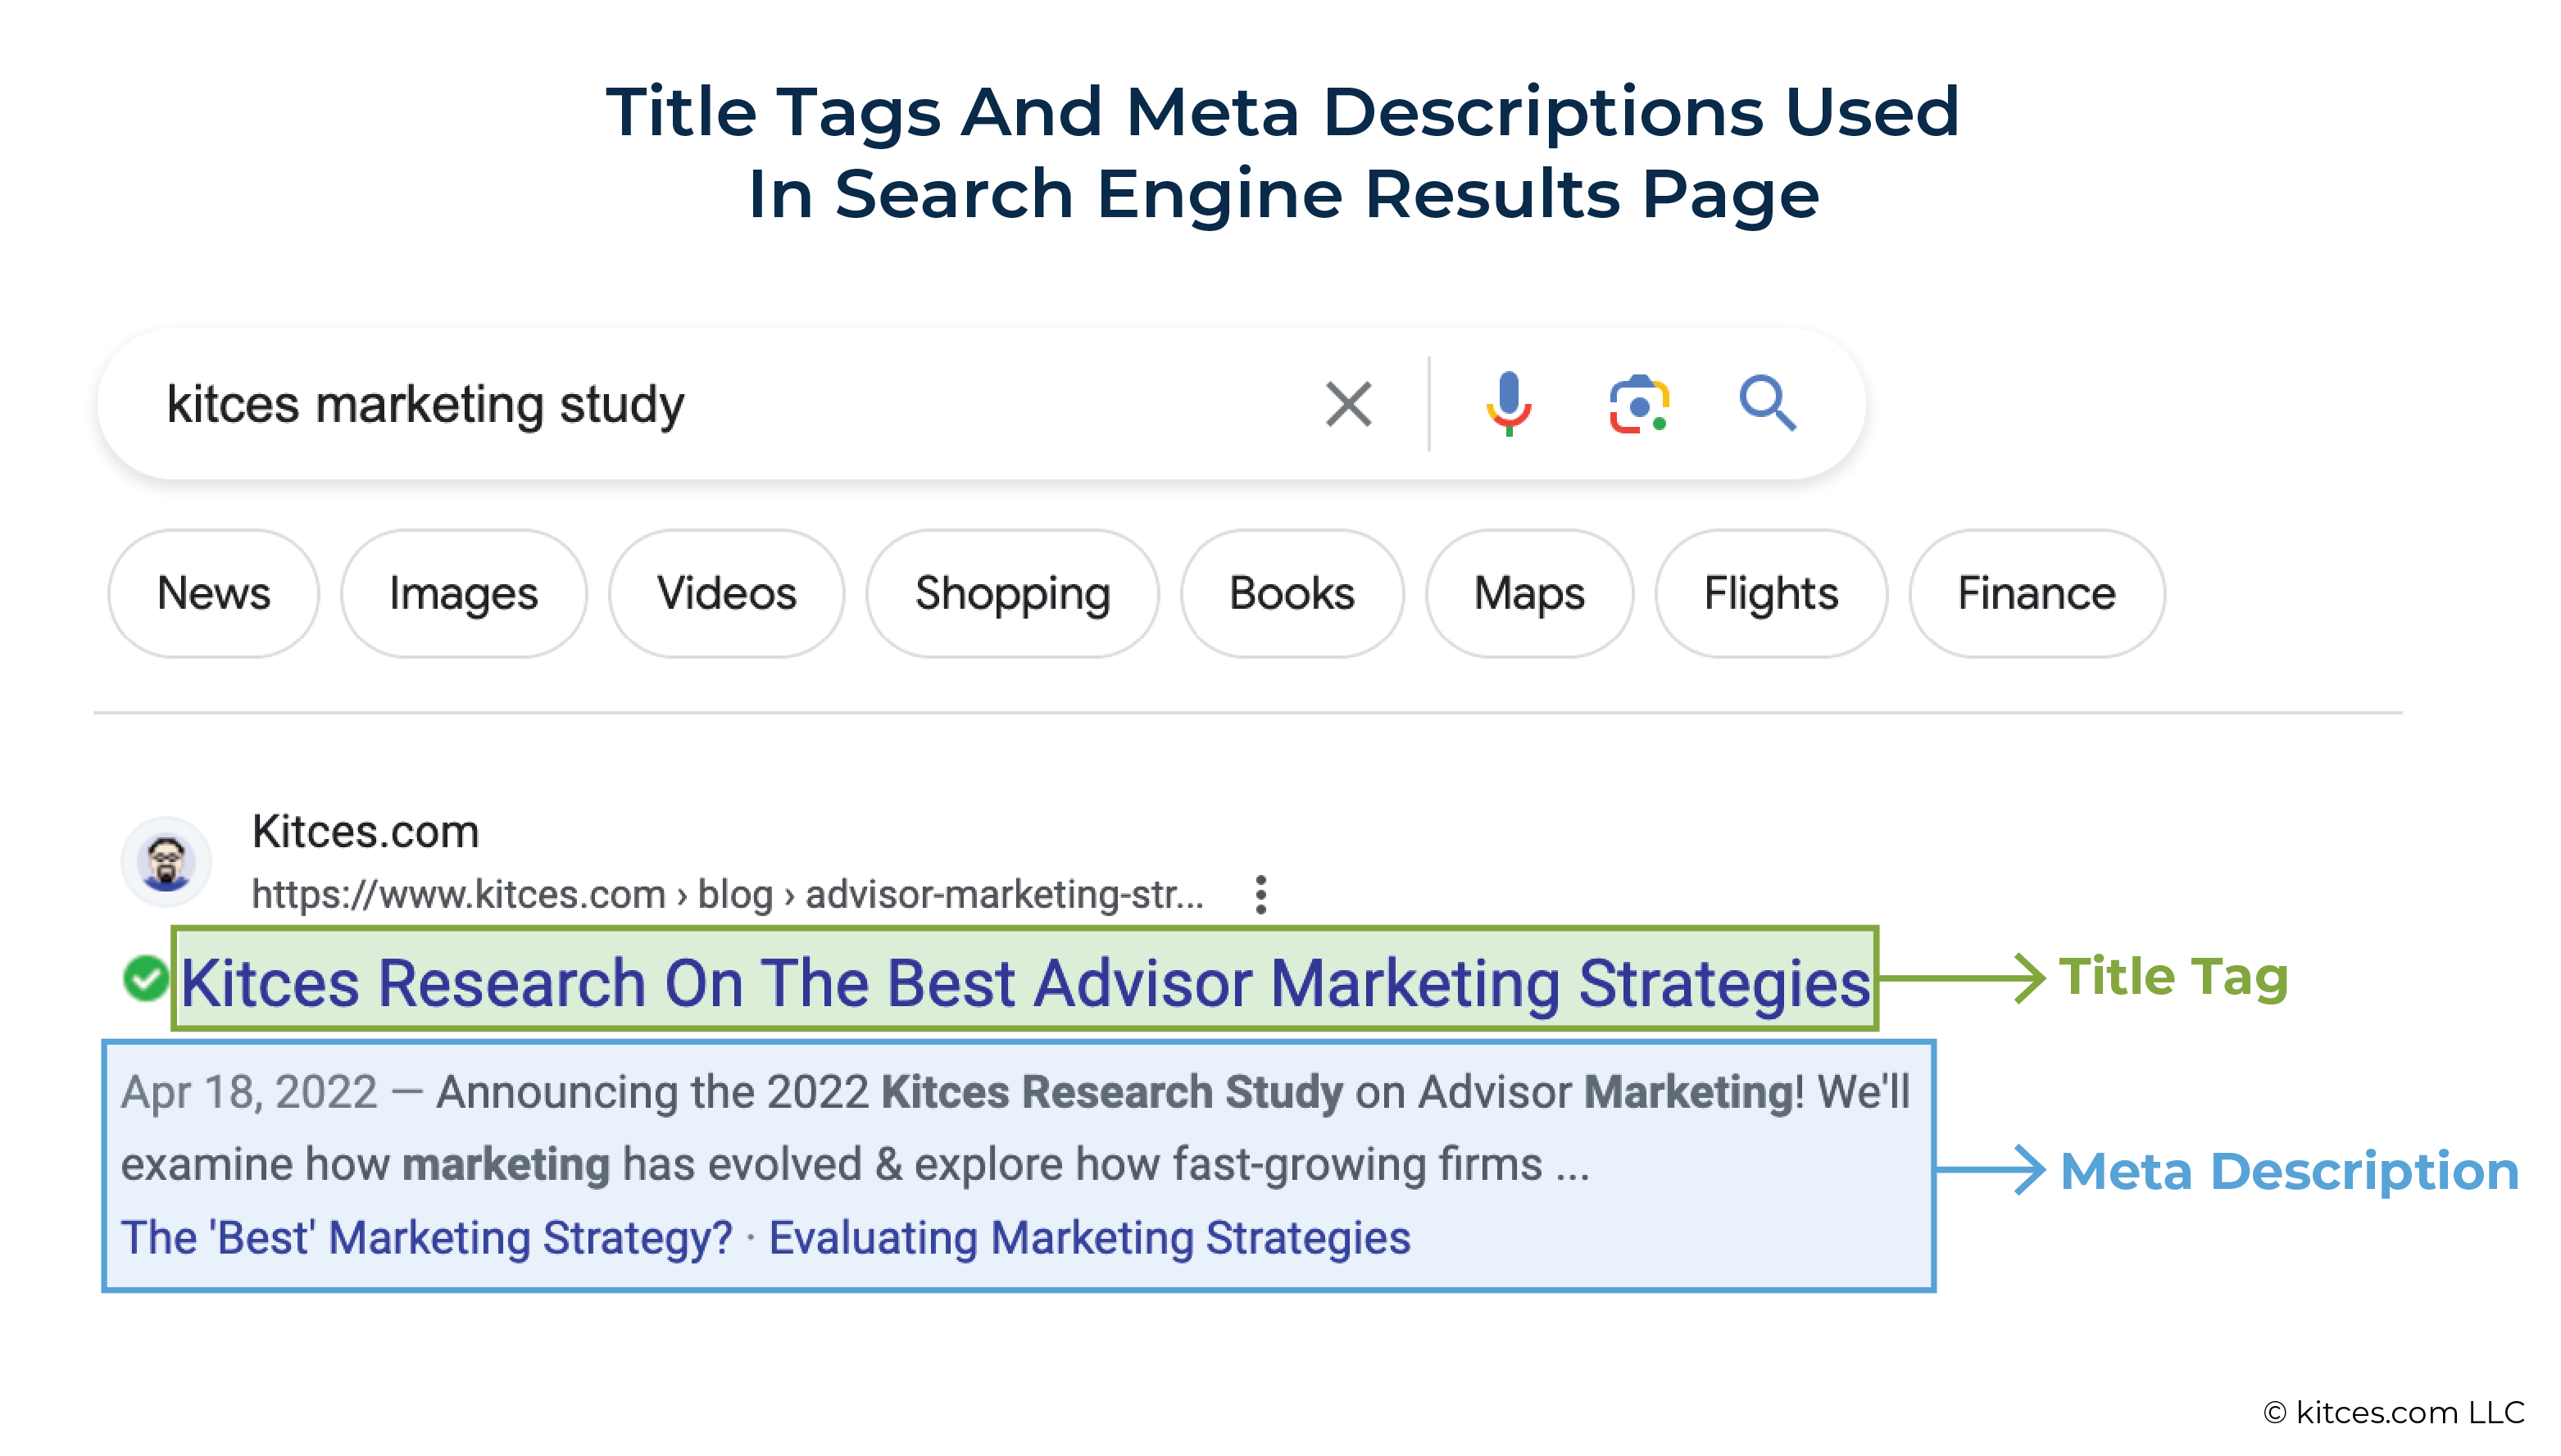 Title Tags And Meta Descriptions Used In Search Engine Results Page